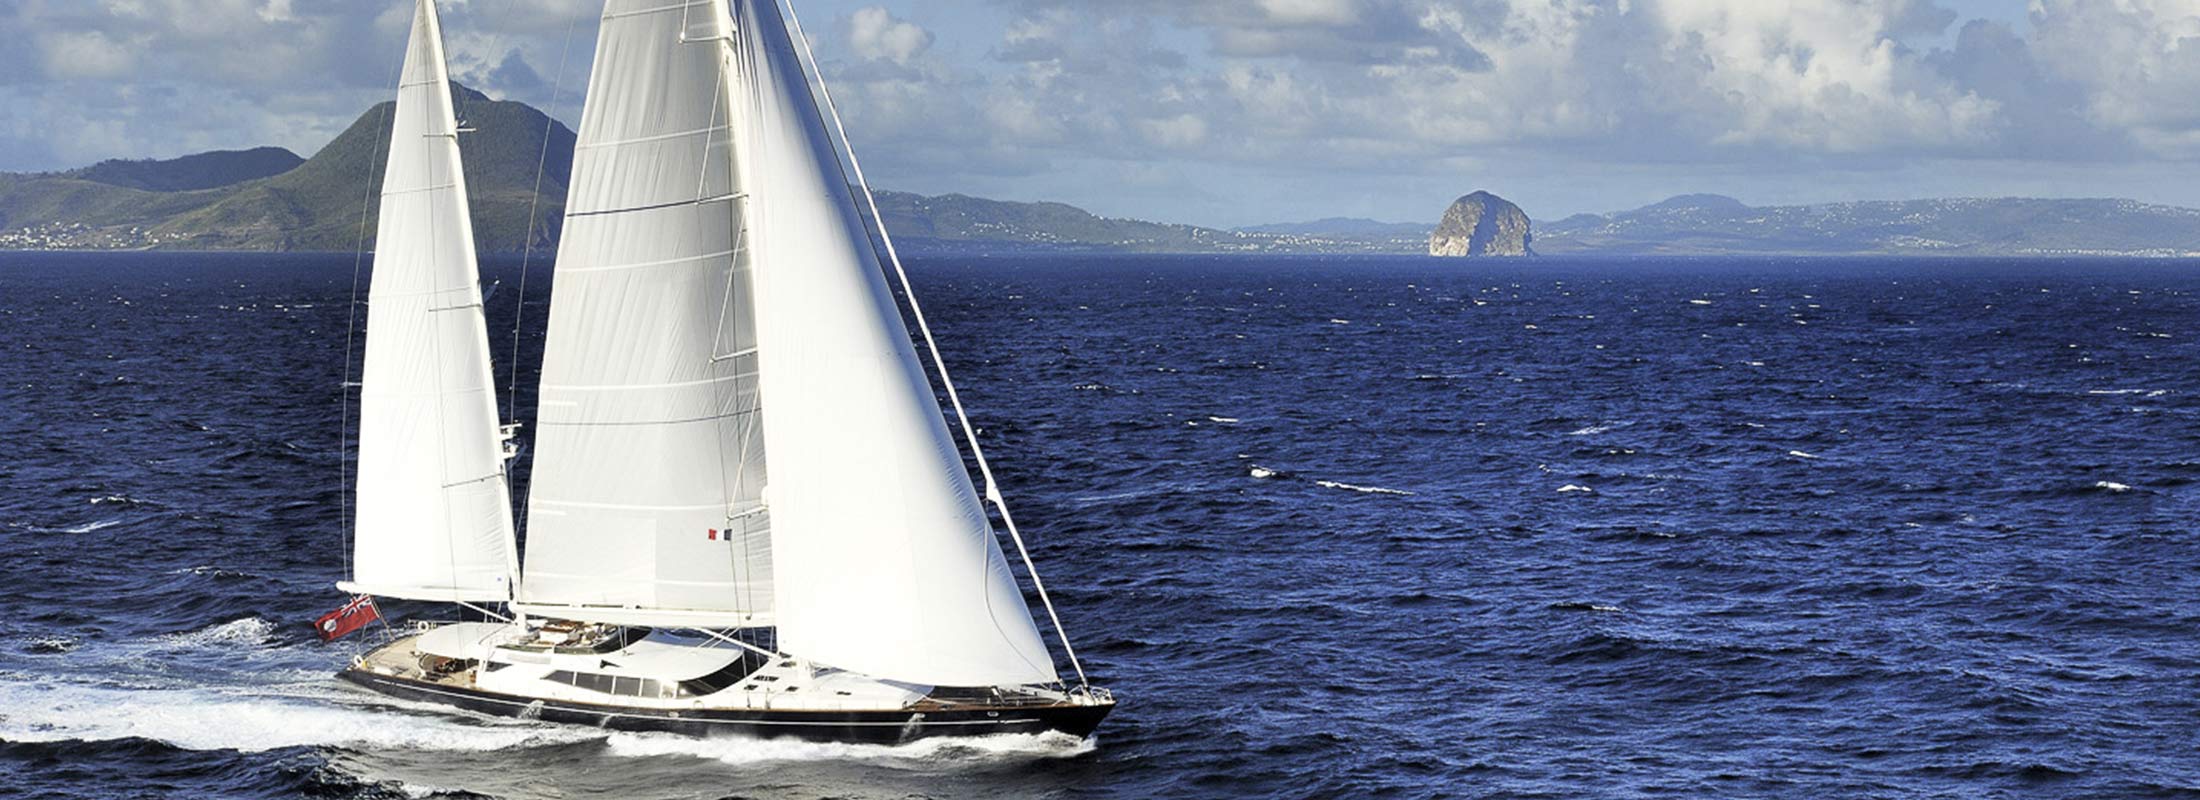 Drumbeat Sailing Yacht for Charter Norway Arctic slider 1